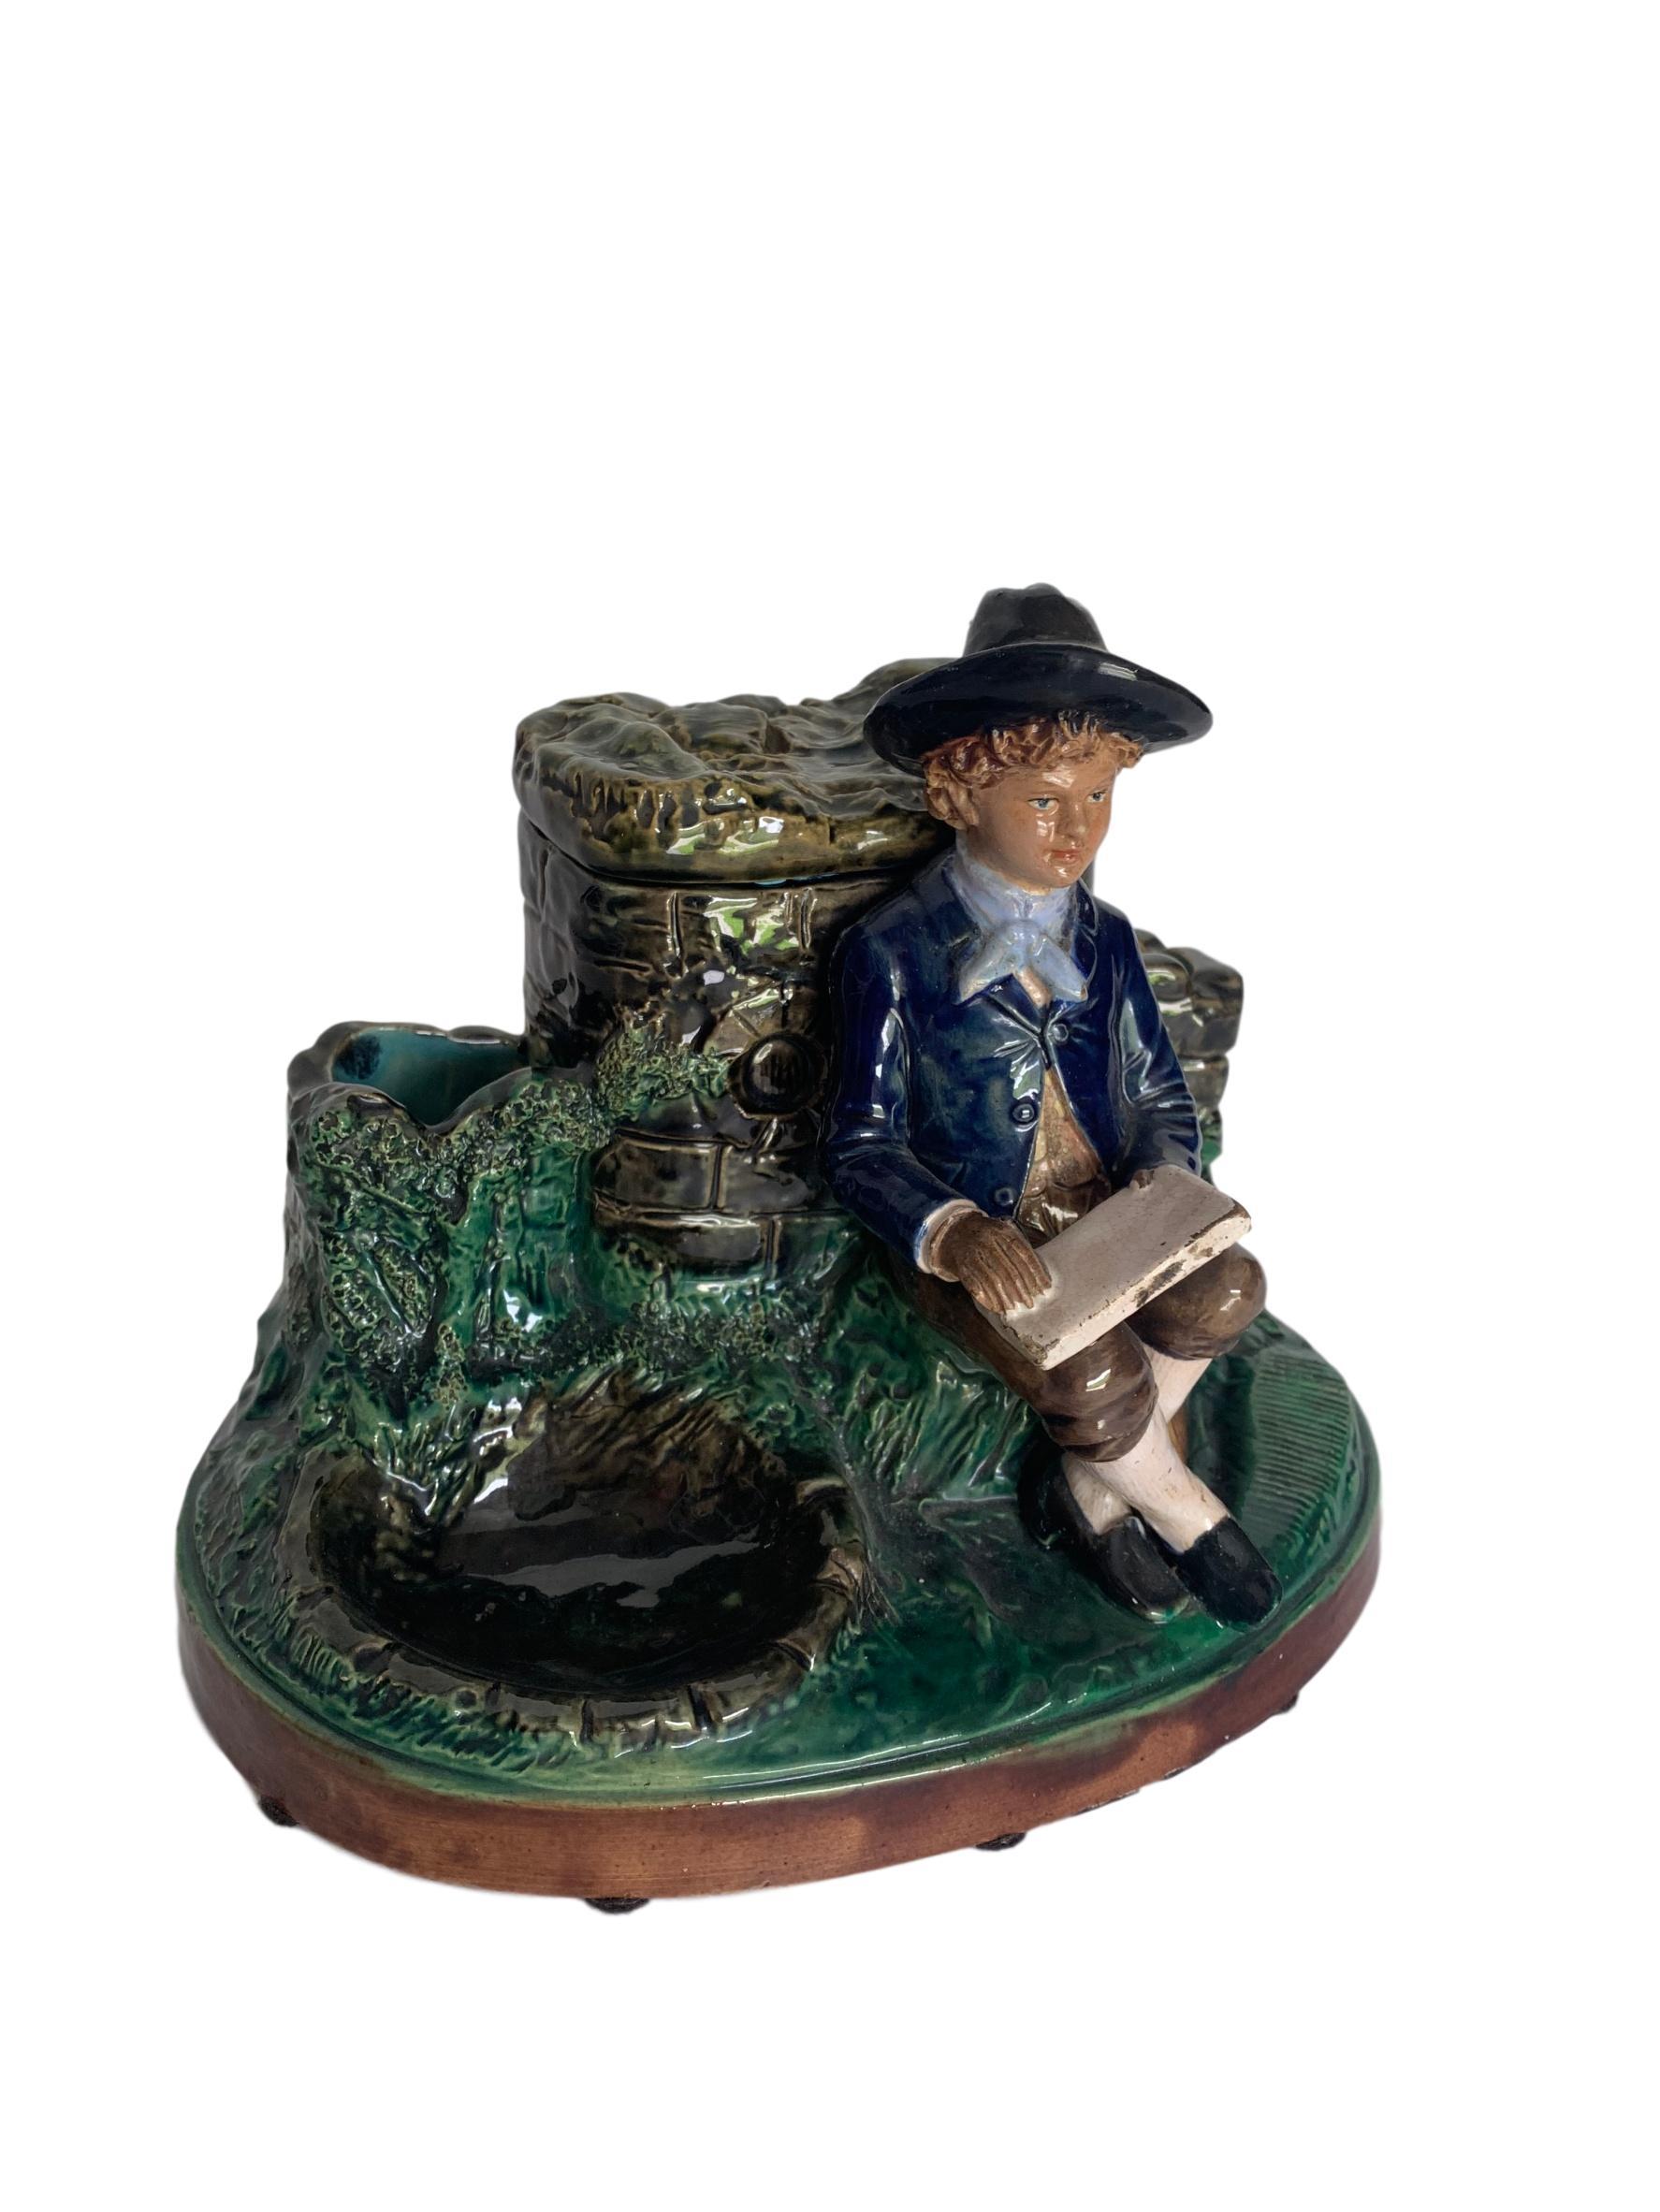 Very rare German Majolica Humidor, boy with books, circa 1880. By B. Block & Company, German. 
Slight wear to book.
For over 28 years we have been among the nation's preeminent specialists in fine antique majolica.